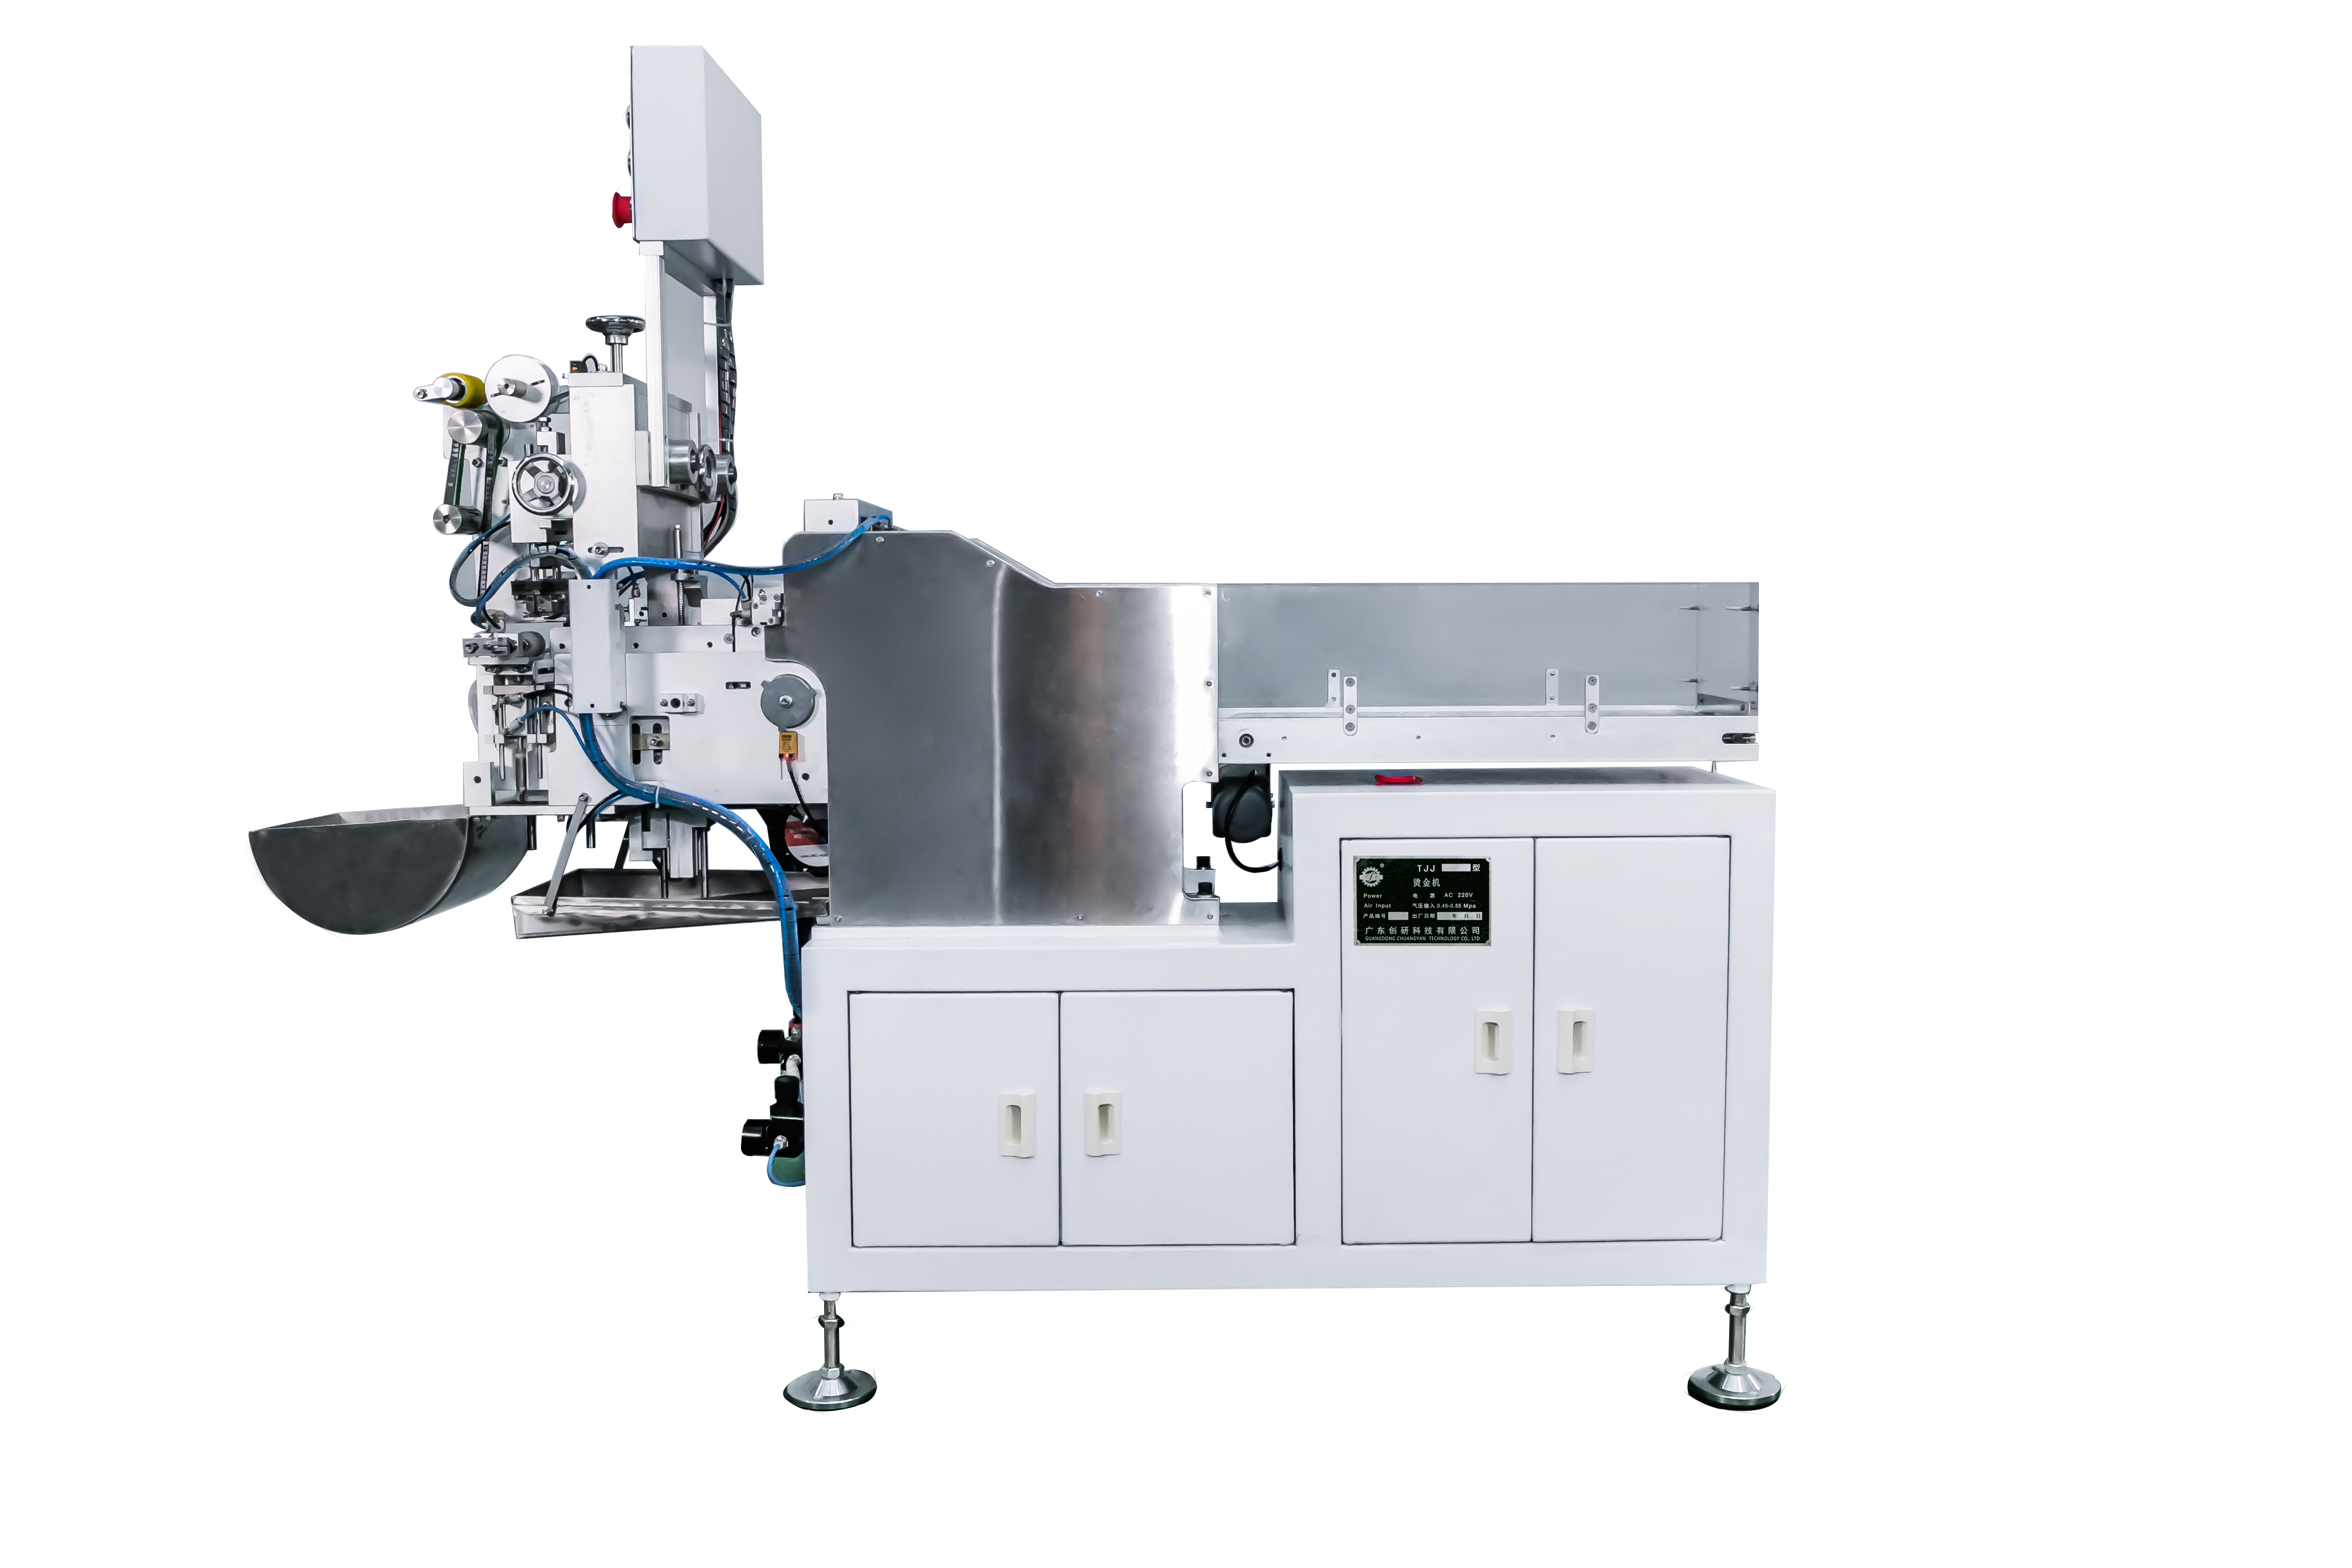 Hot Foil Stamping Machine for Toothbrush Production Line Featured Image